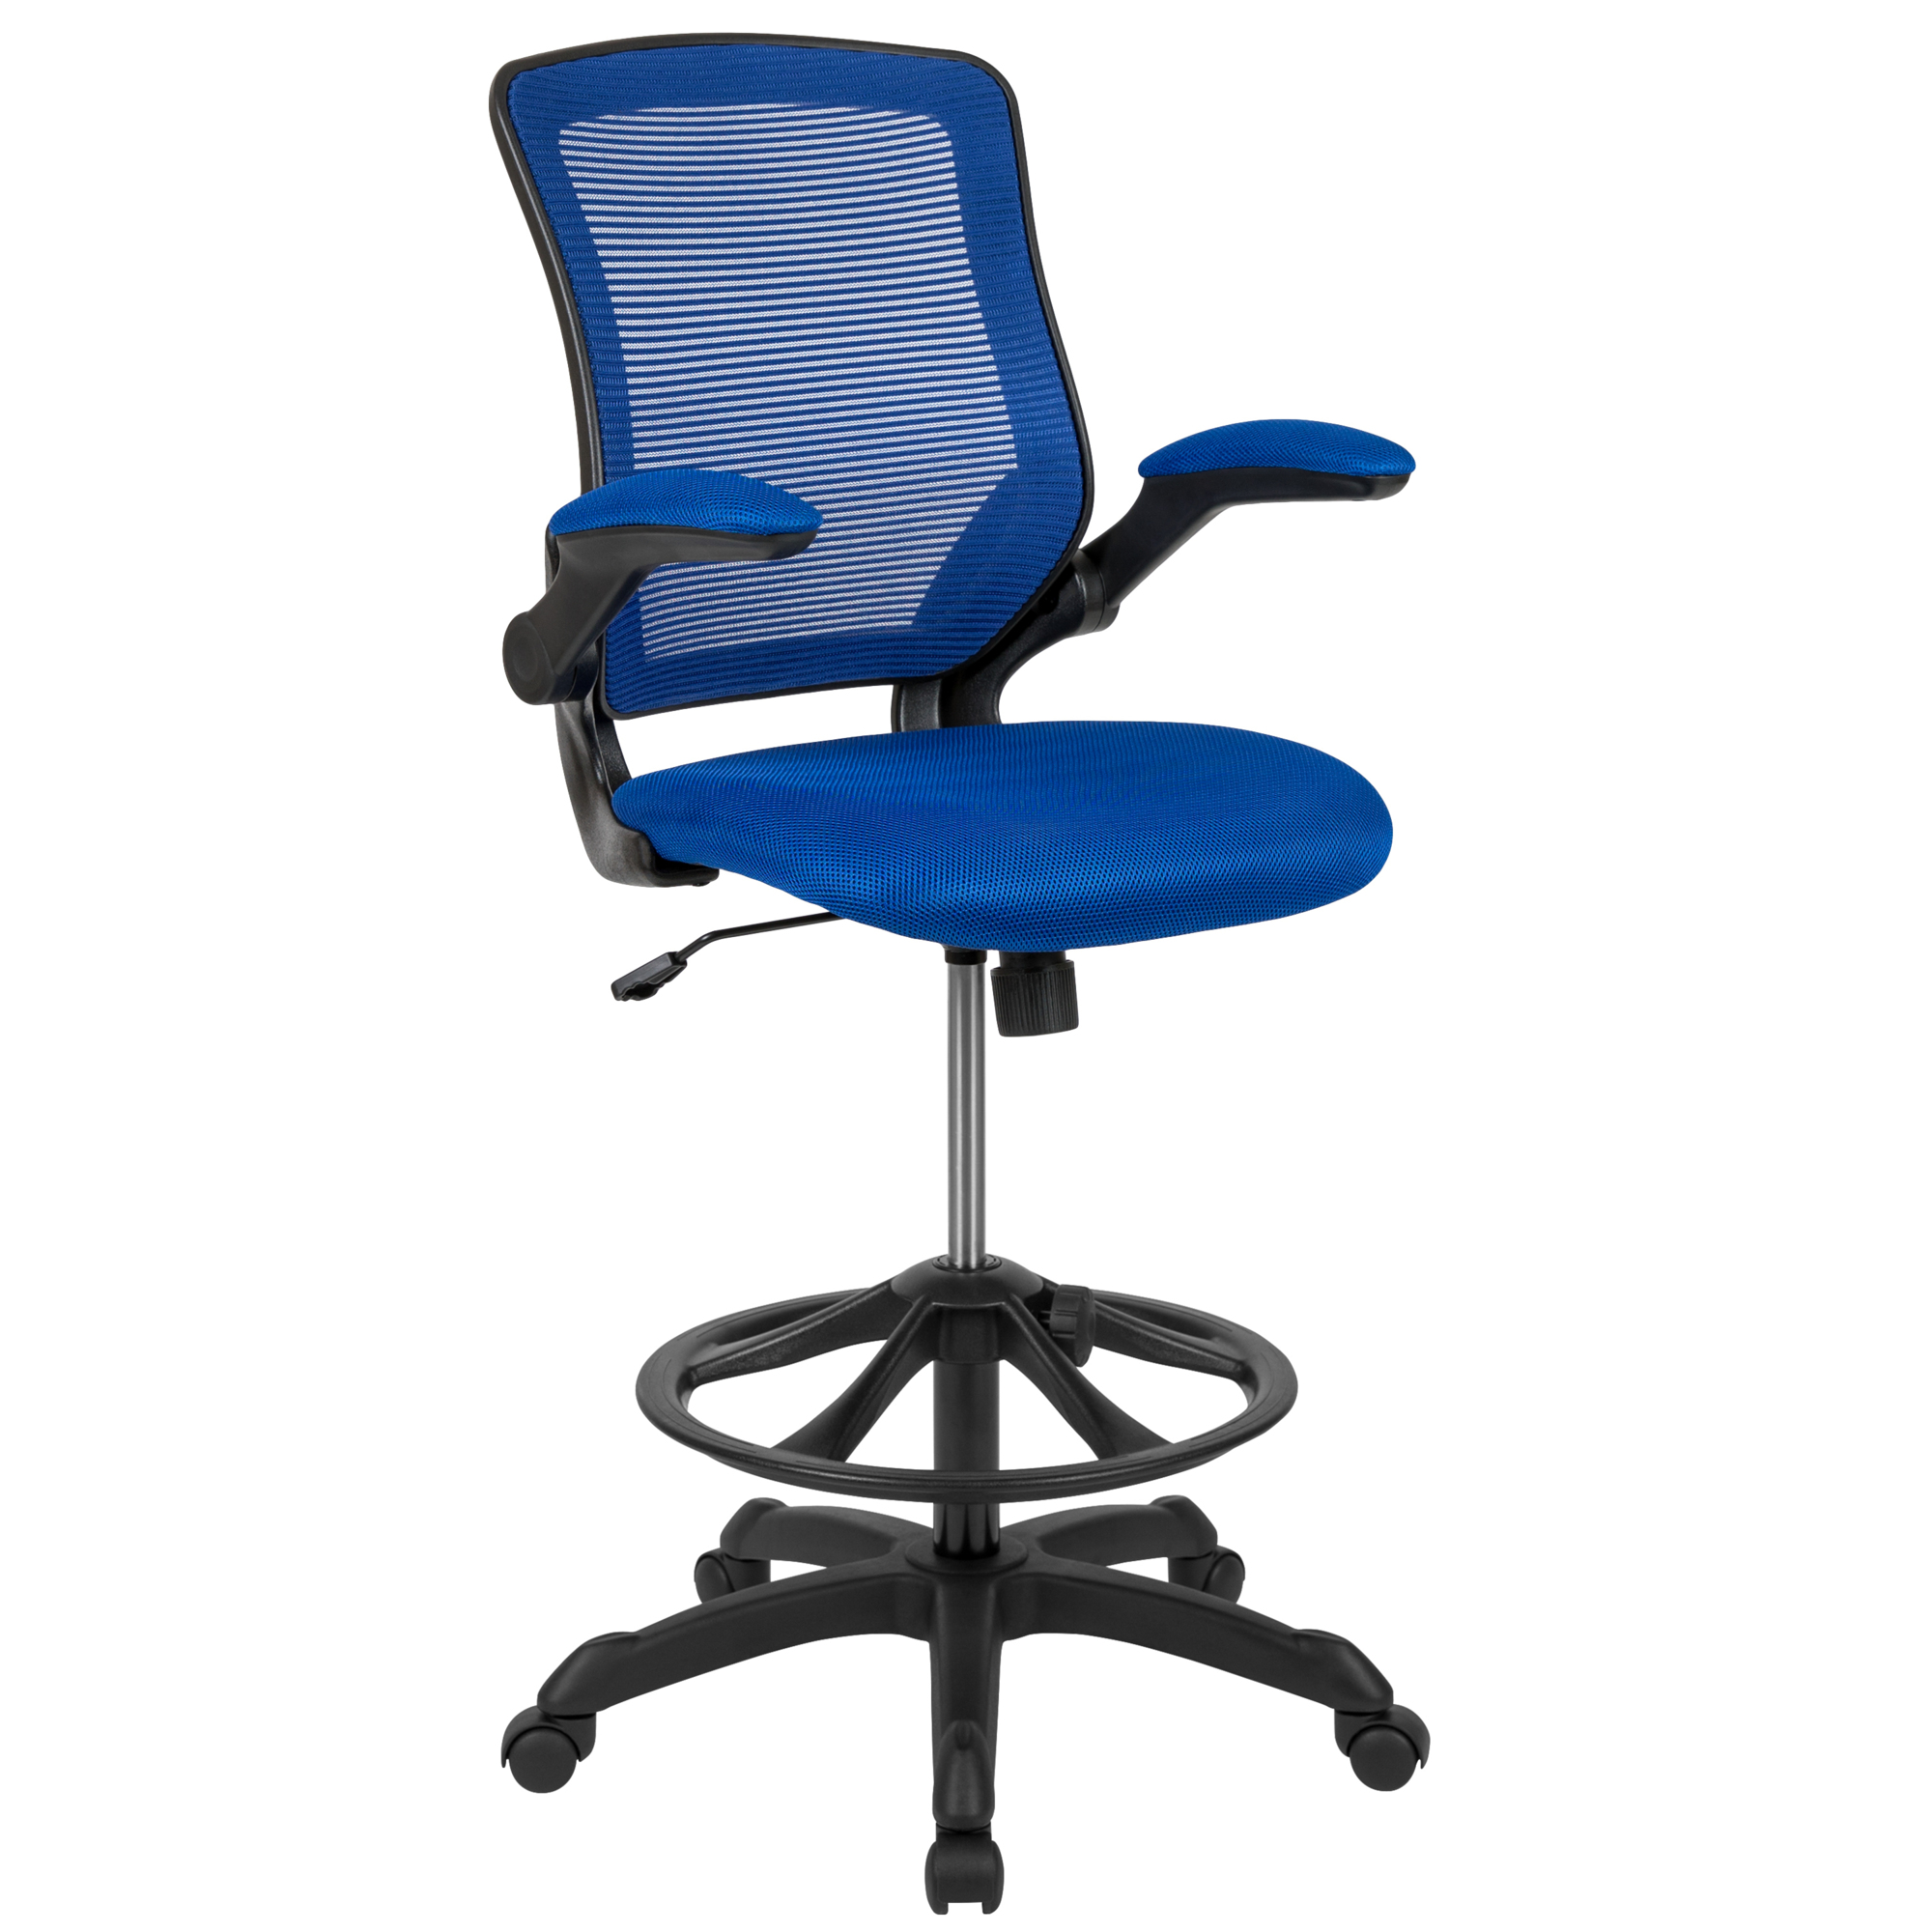 Flash Furniture, Mid-Back Blue Mesh Ergonomic Drafting Chair, Primary Color Blue, Included (qty.) 1 Model BLZP8805DBLUE